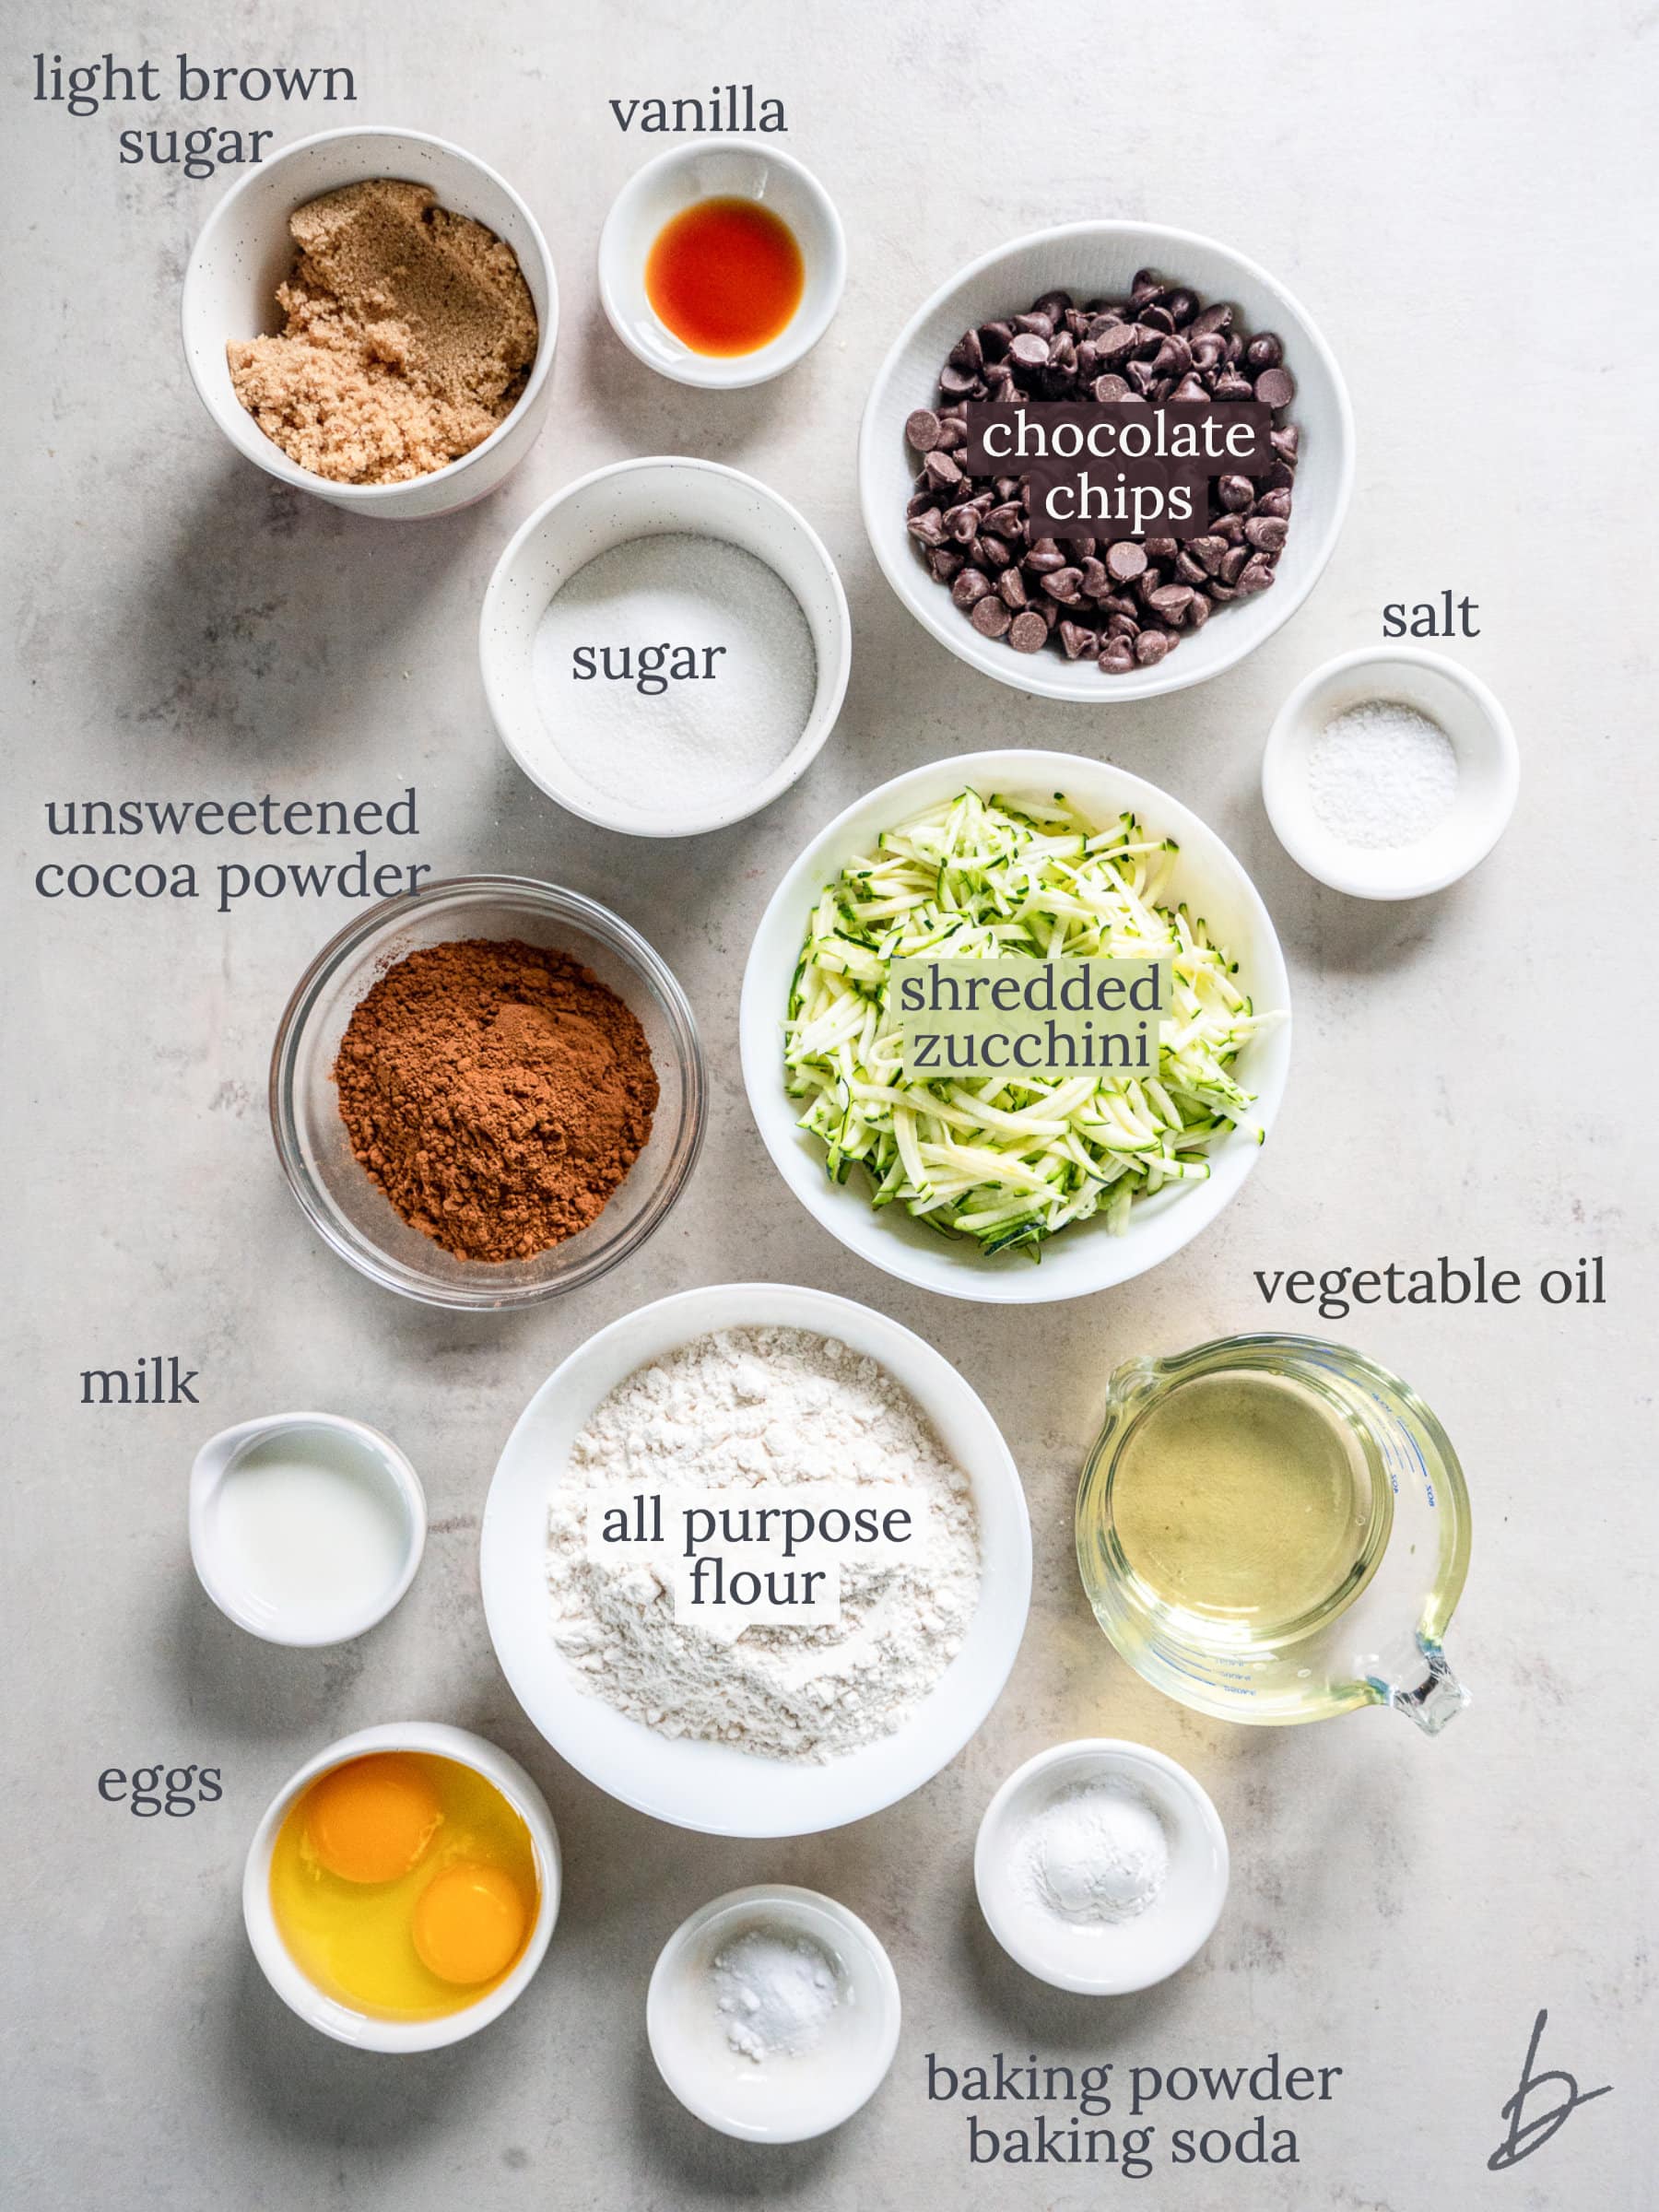 bowls of ingredients to make double chocolate zucchini muffins.